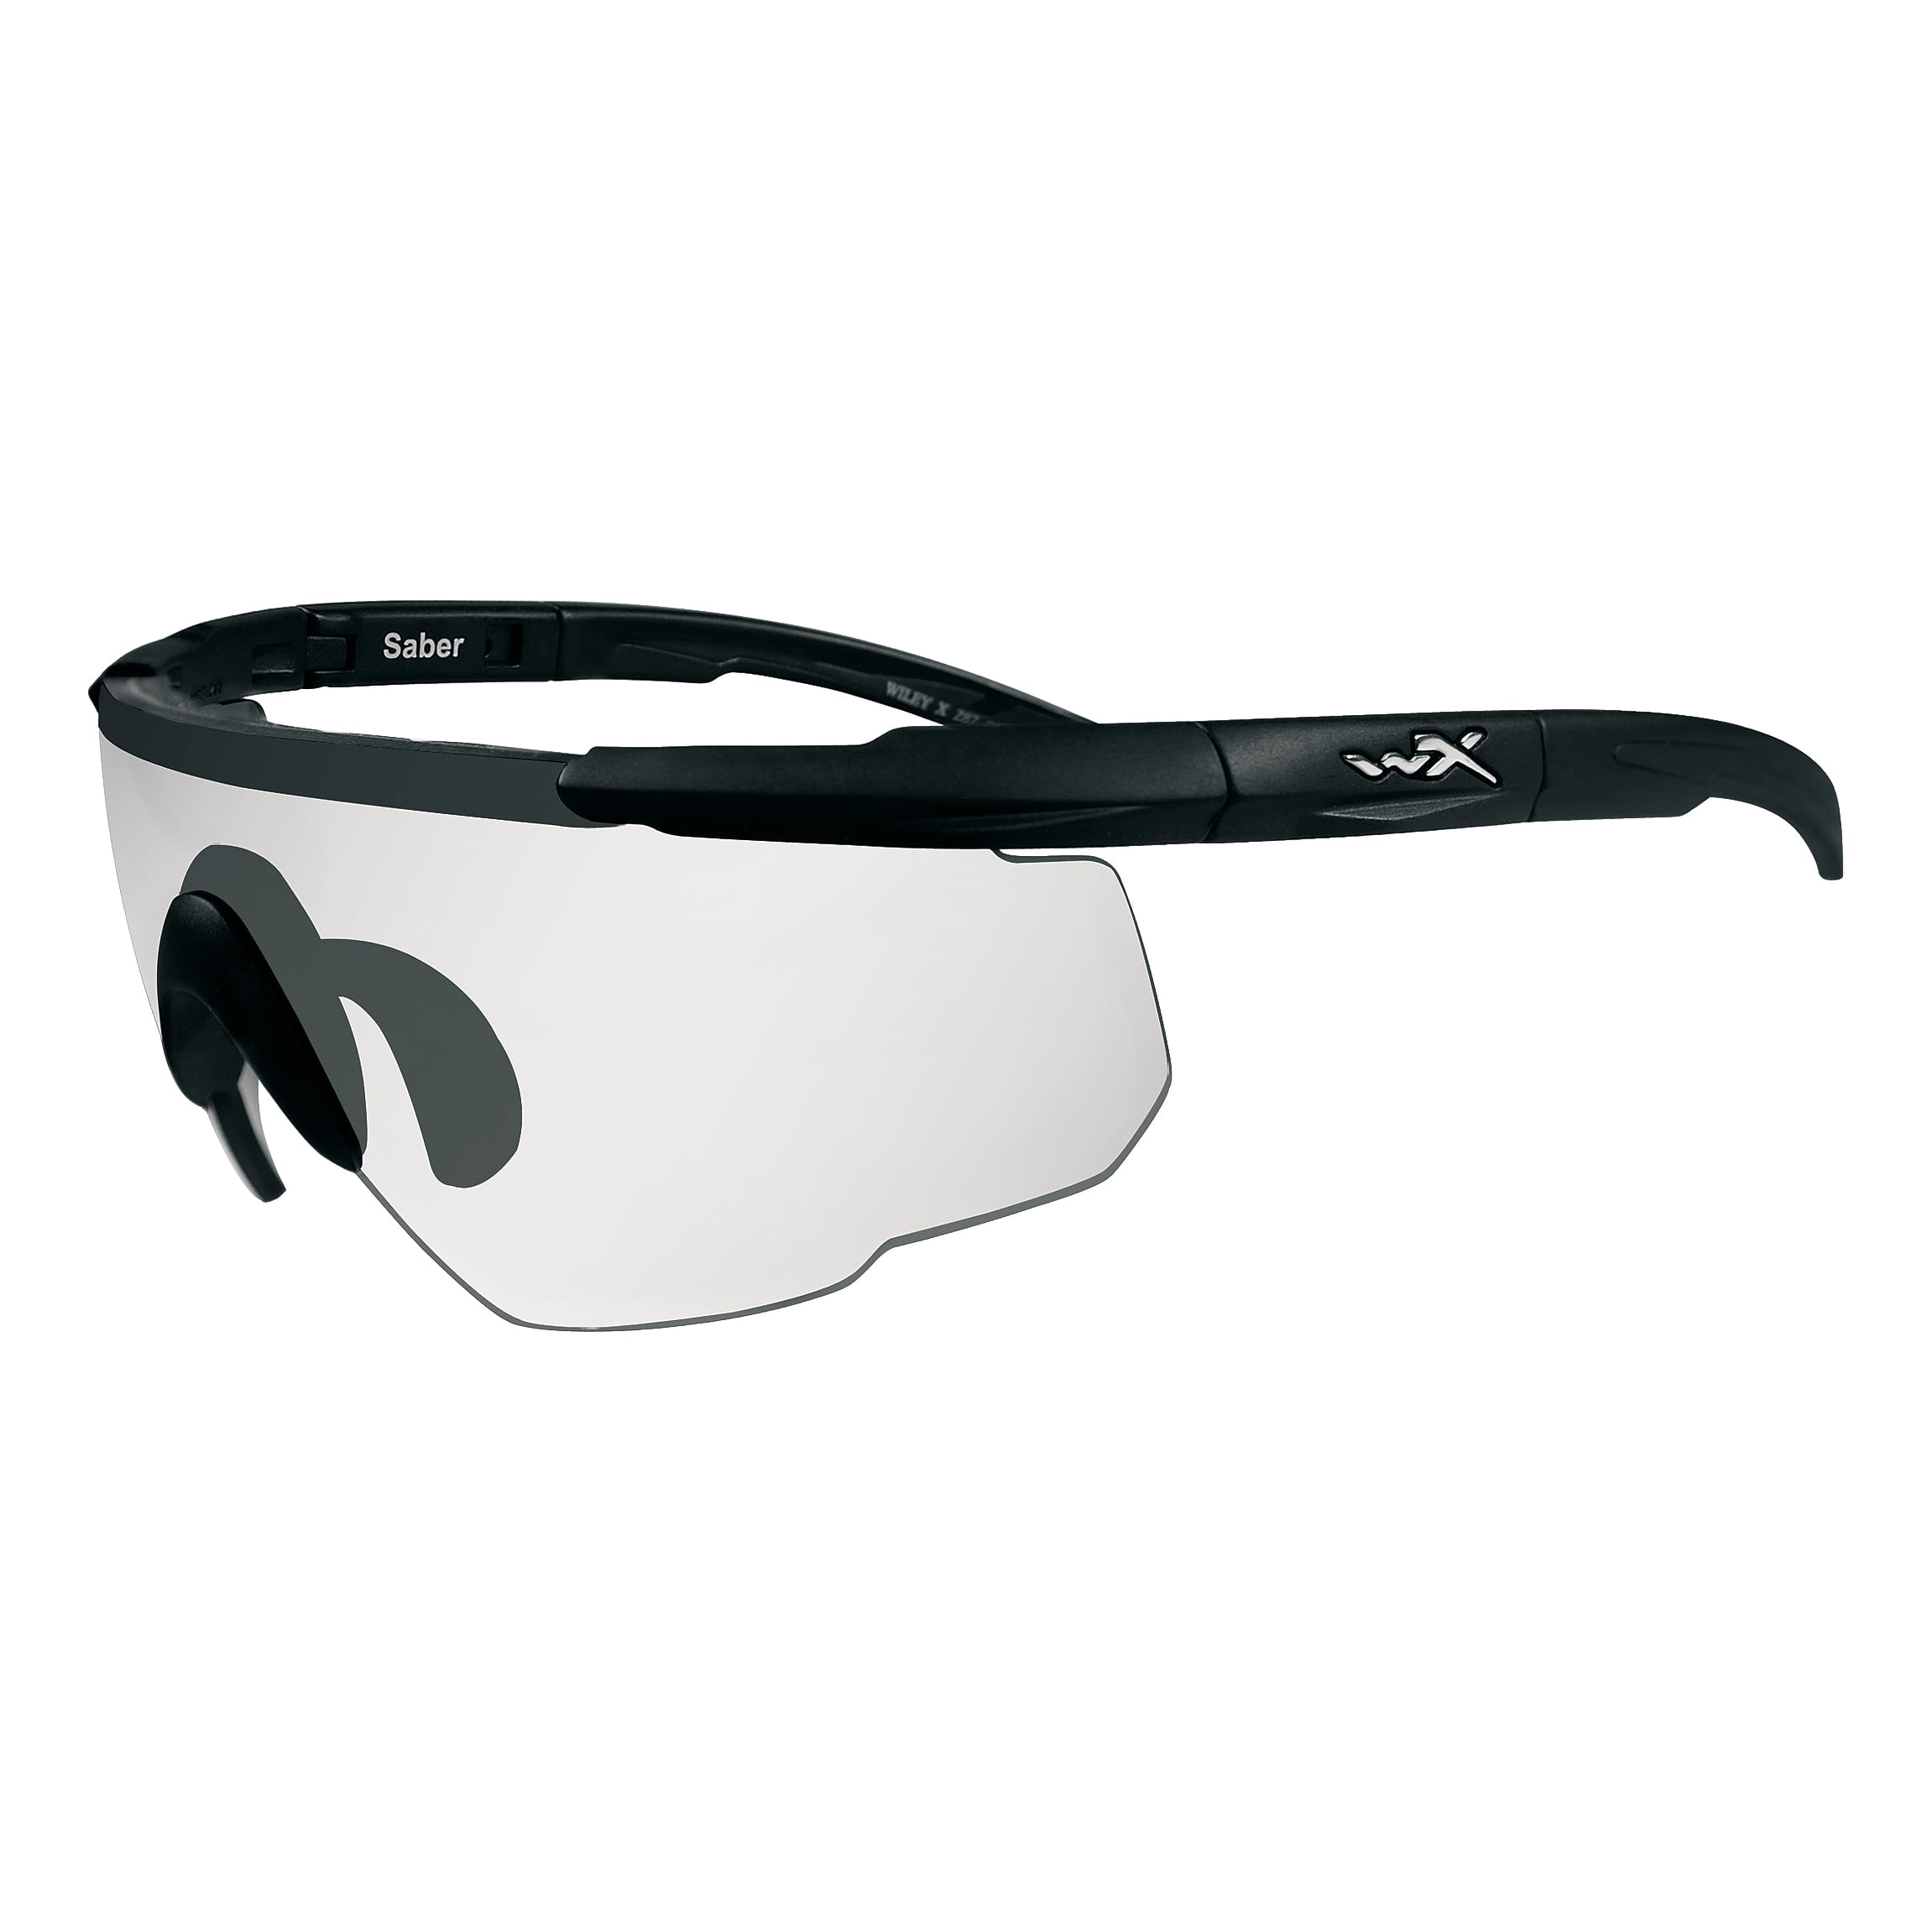 Wiley X Saber Advanced Shooting Glasses - Black/Clear